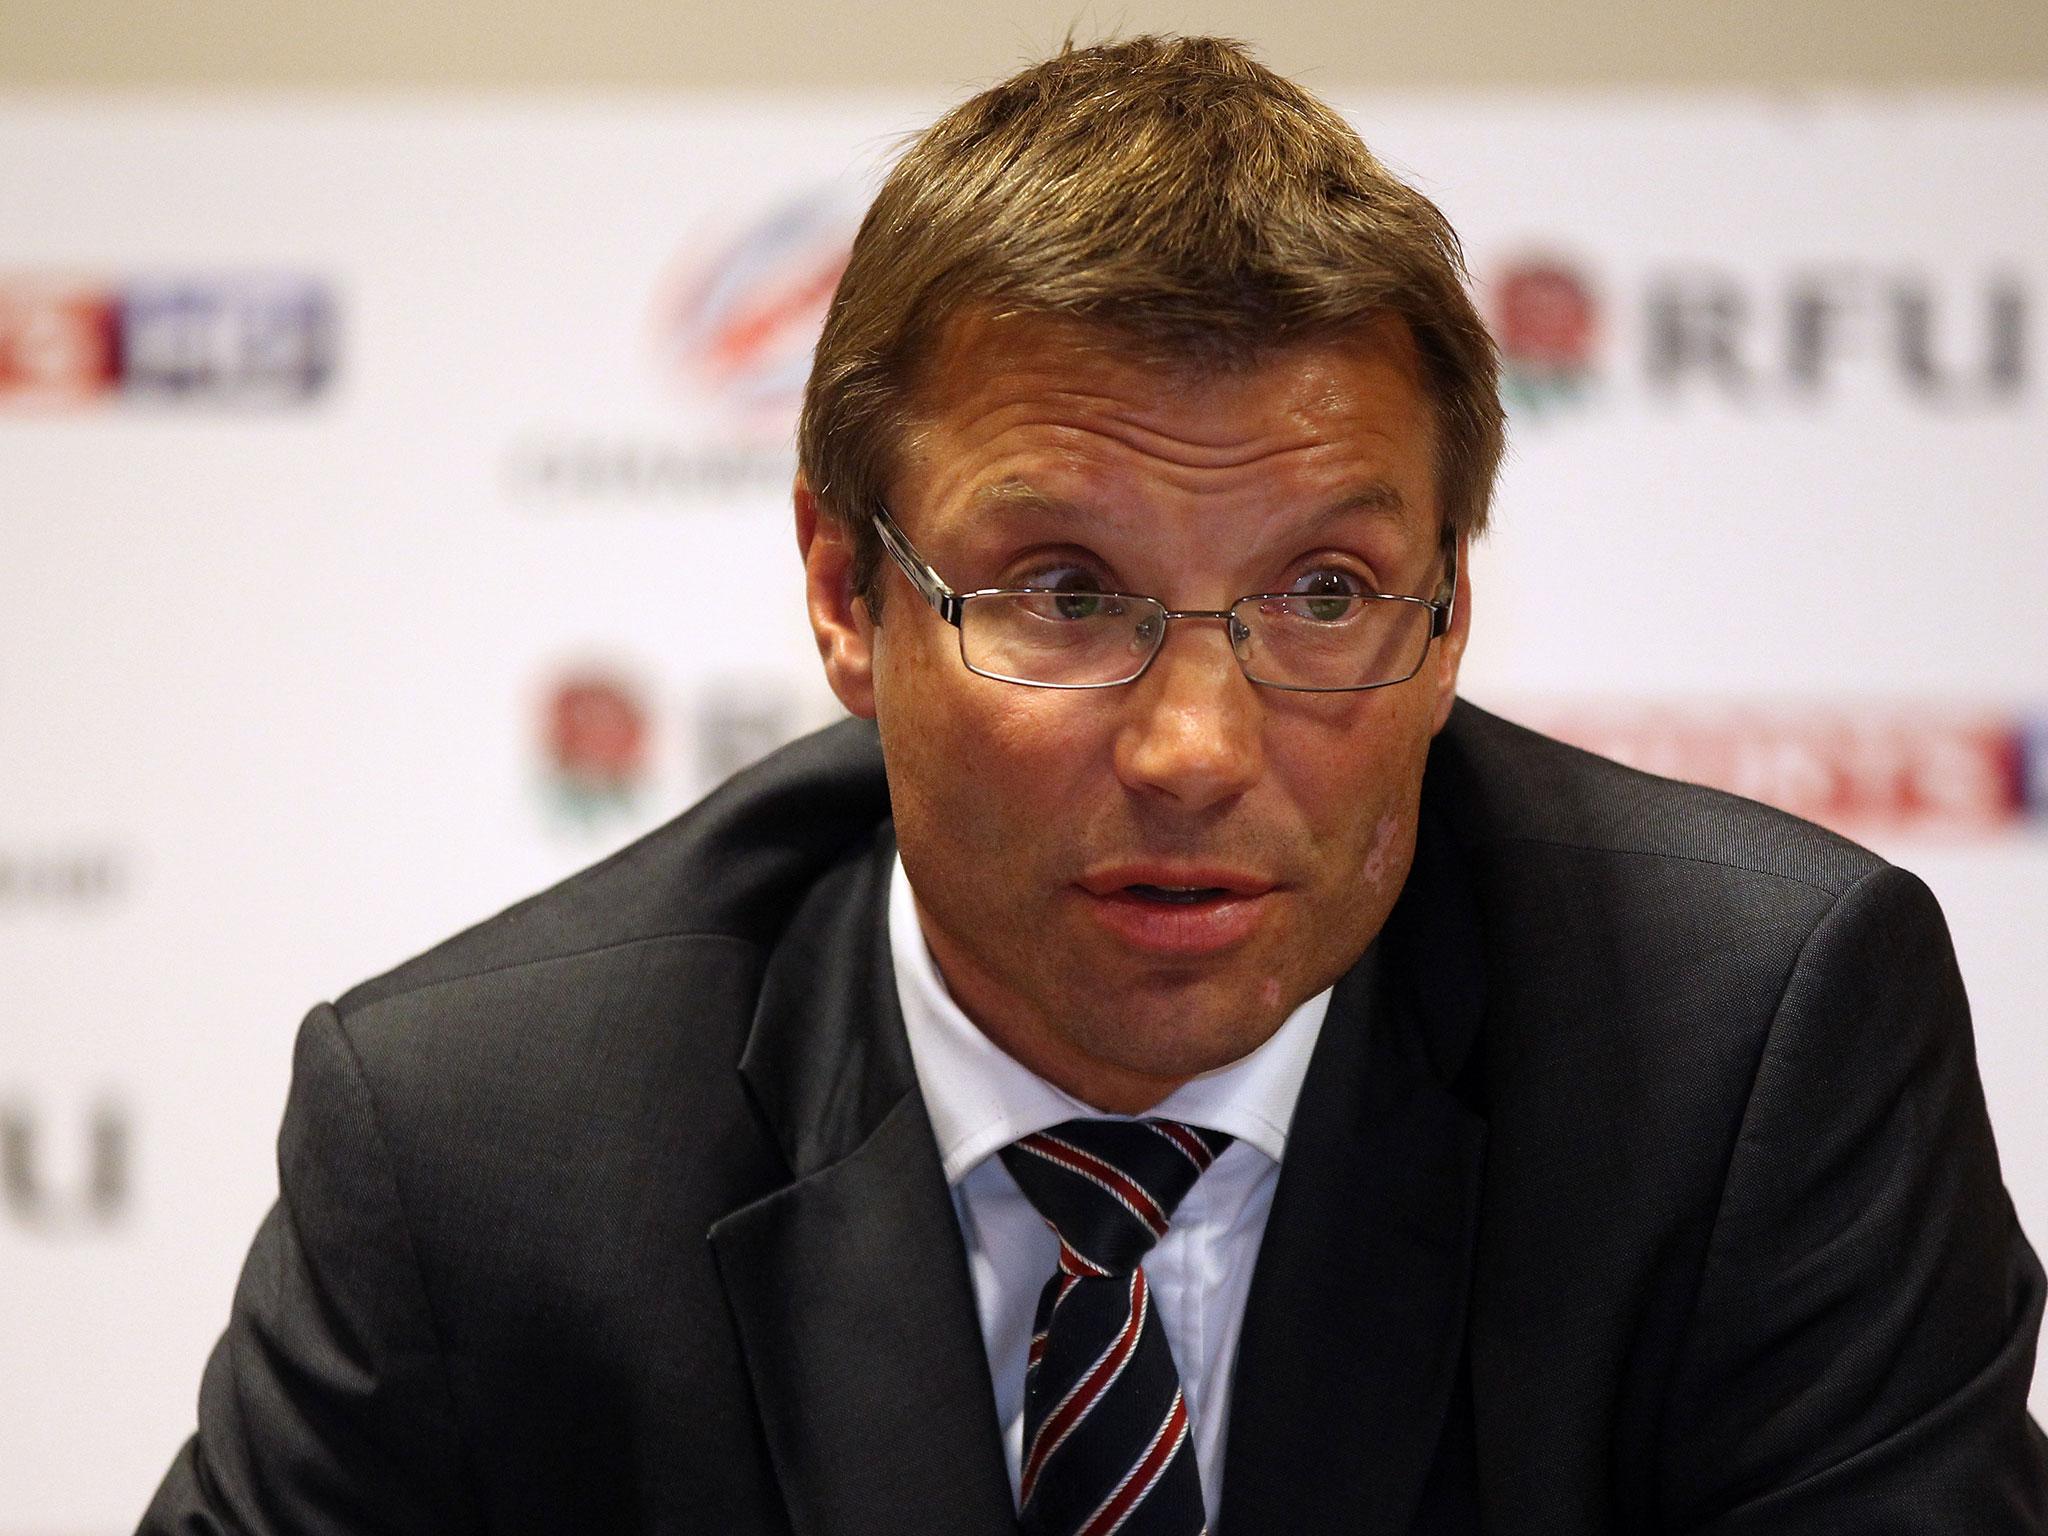 &#13;
Rob Andrew hasn't held back in his criticism of Lancaster &#13;